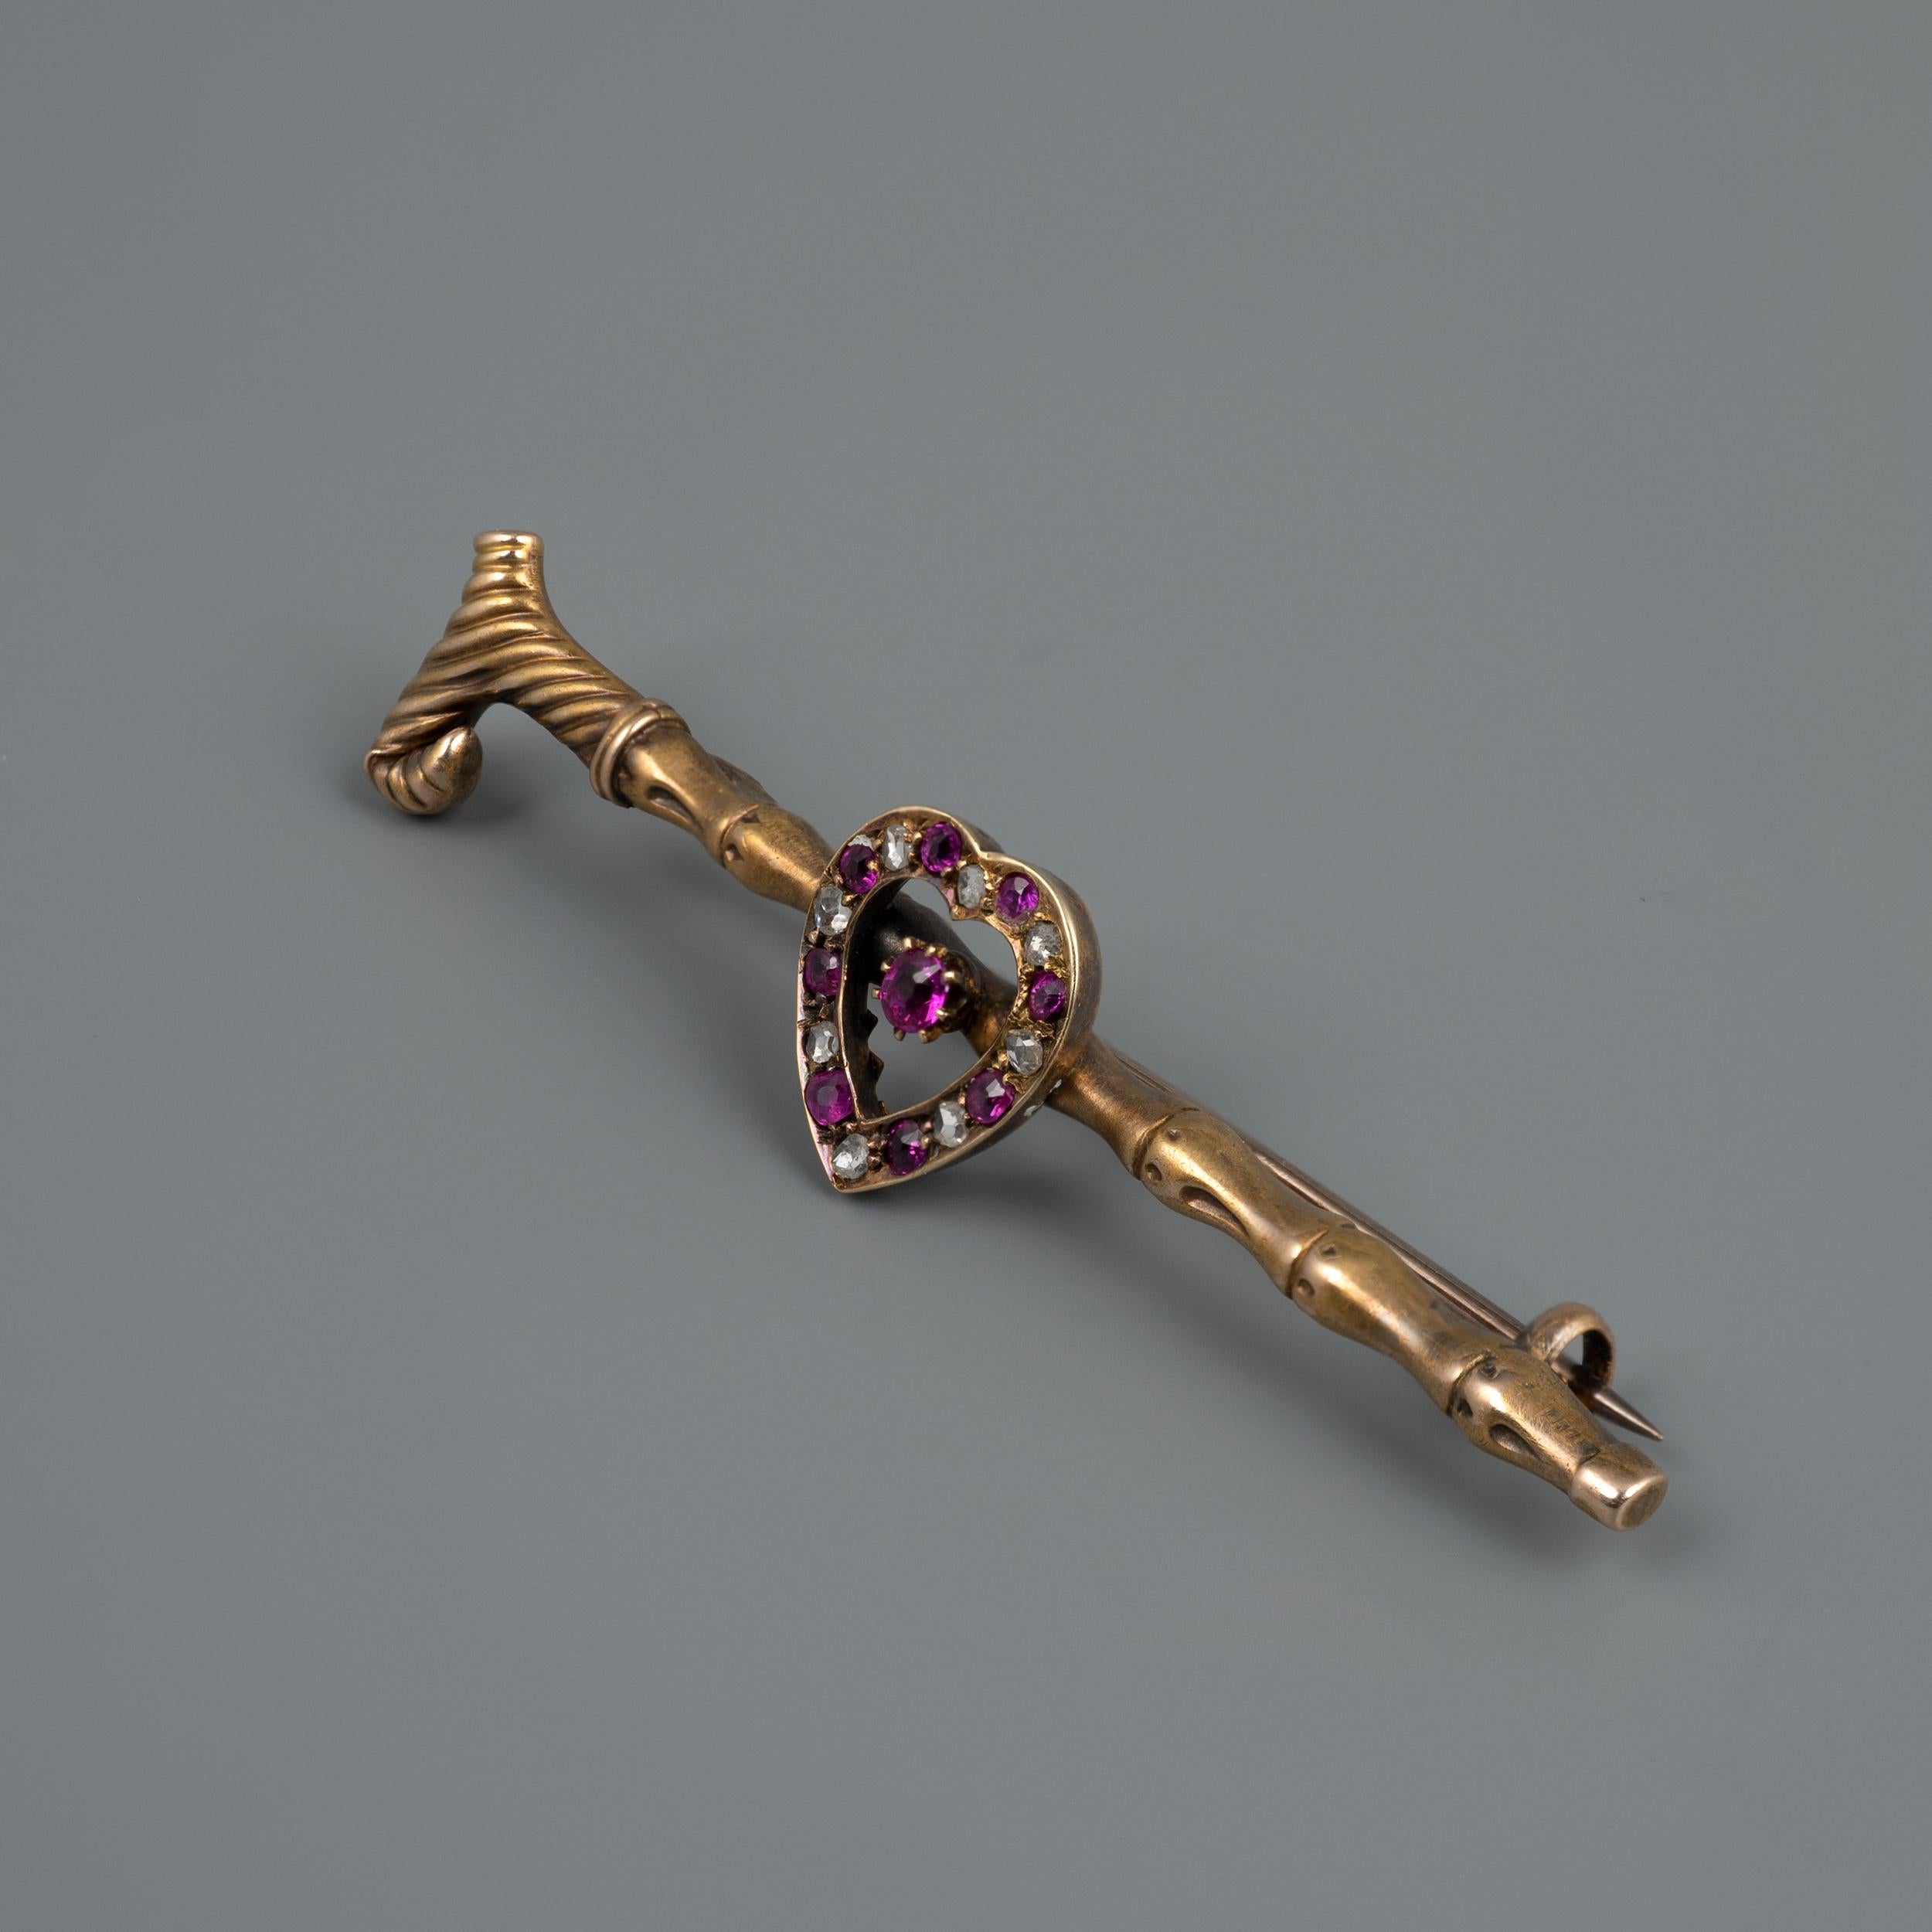 A delightful antique 15ct gold brooch pin, in the form of a walking cane with heart, set with ruby and diamonds, circa 1920s

The splendid and unique piece is crafted as a bamboo walking cane with a chased handle. The centrepiece open heart is